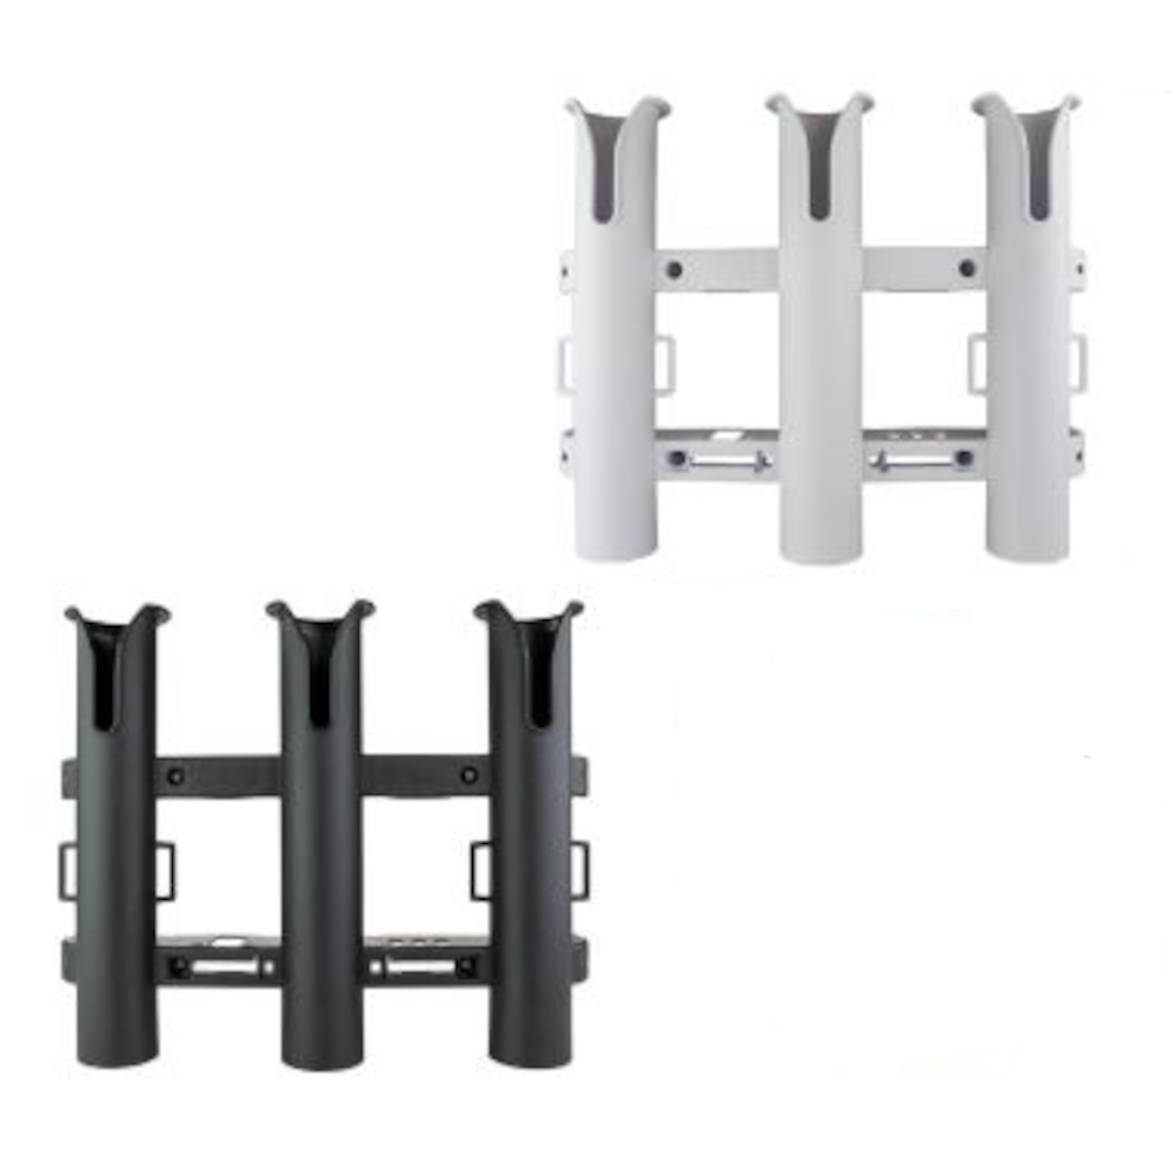 Rod Holders for Sale at Go2marine